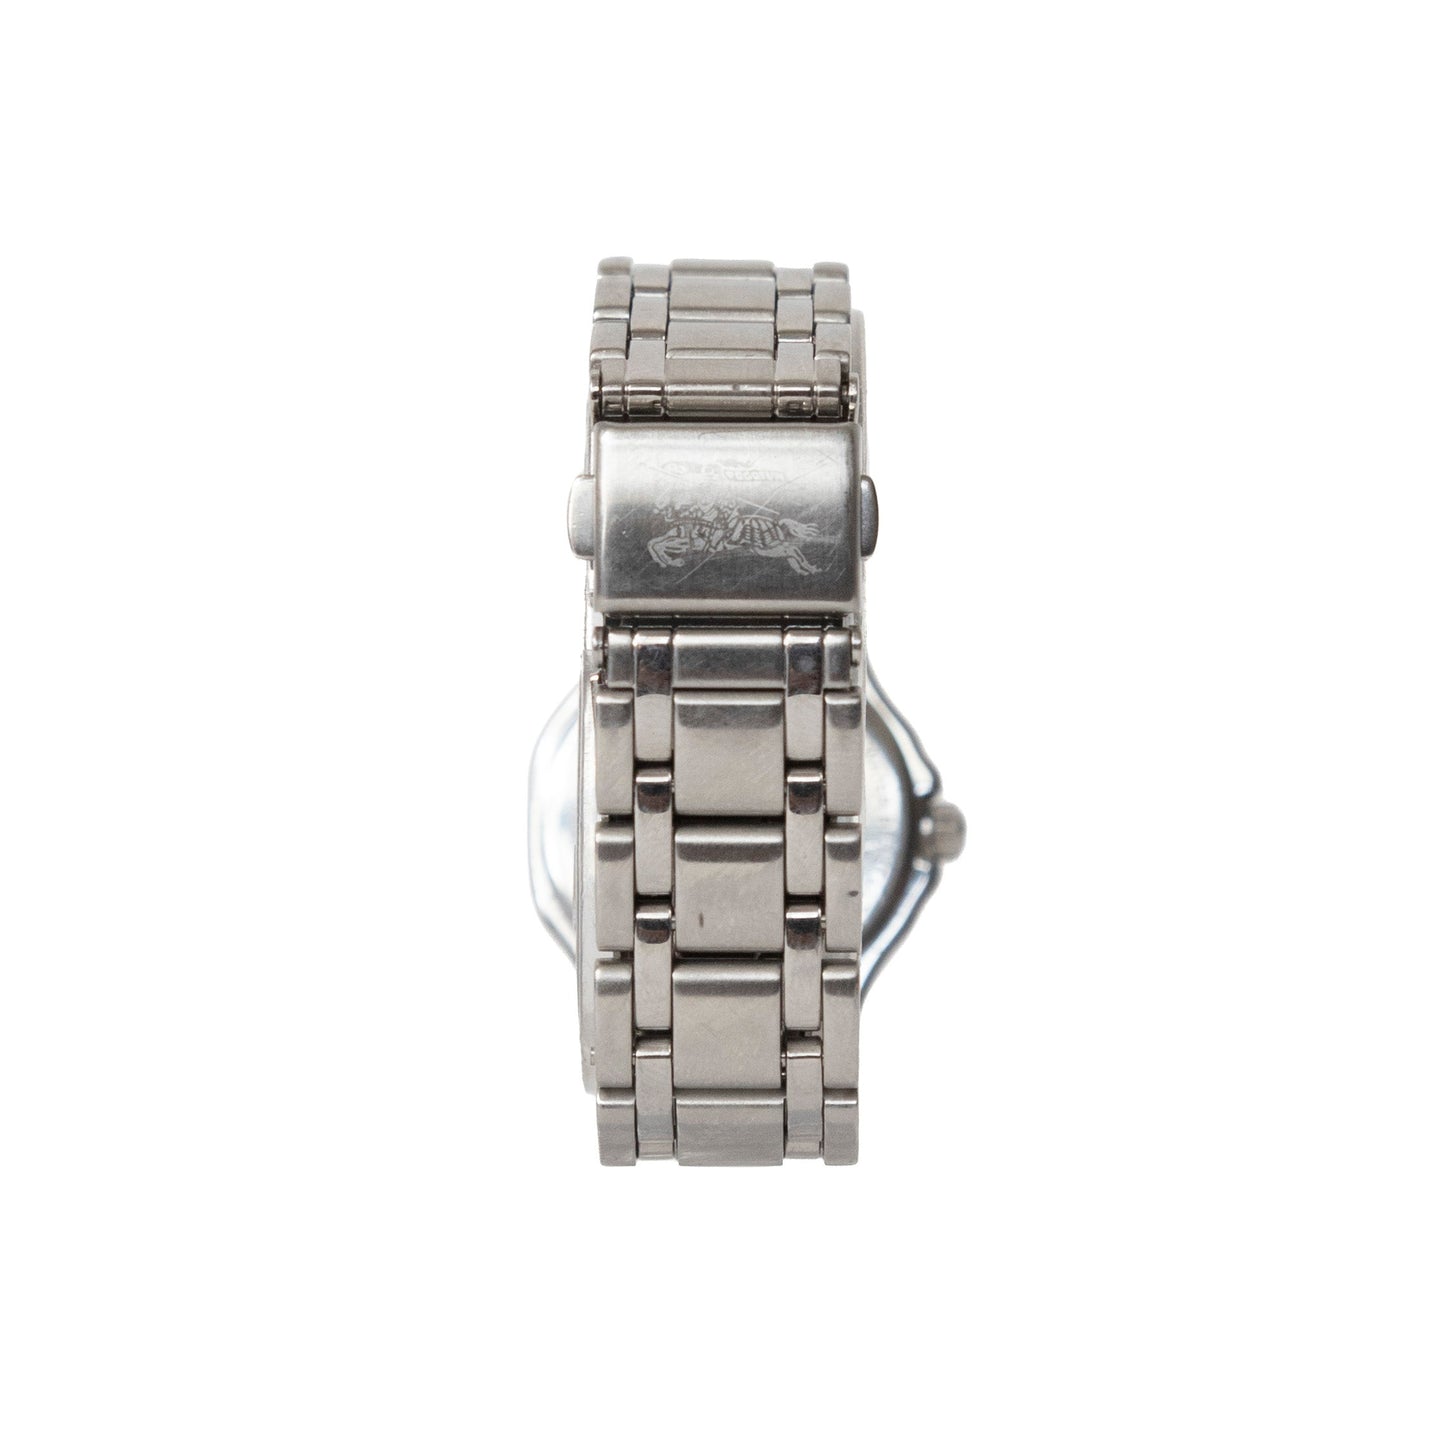 Burberry Model B230 Stainless Steel Watch